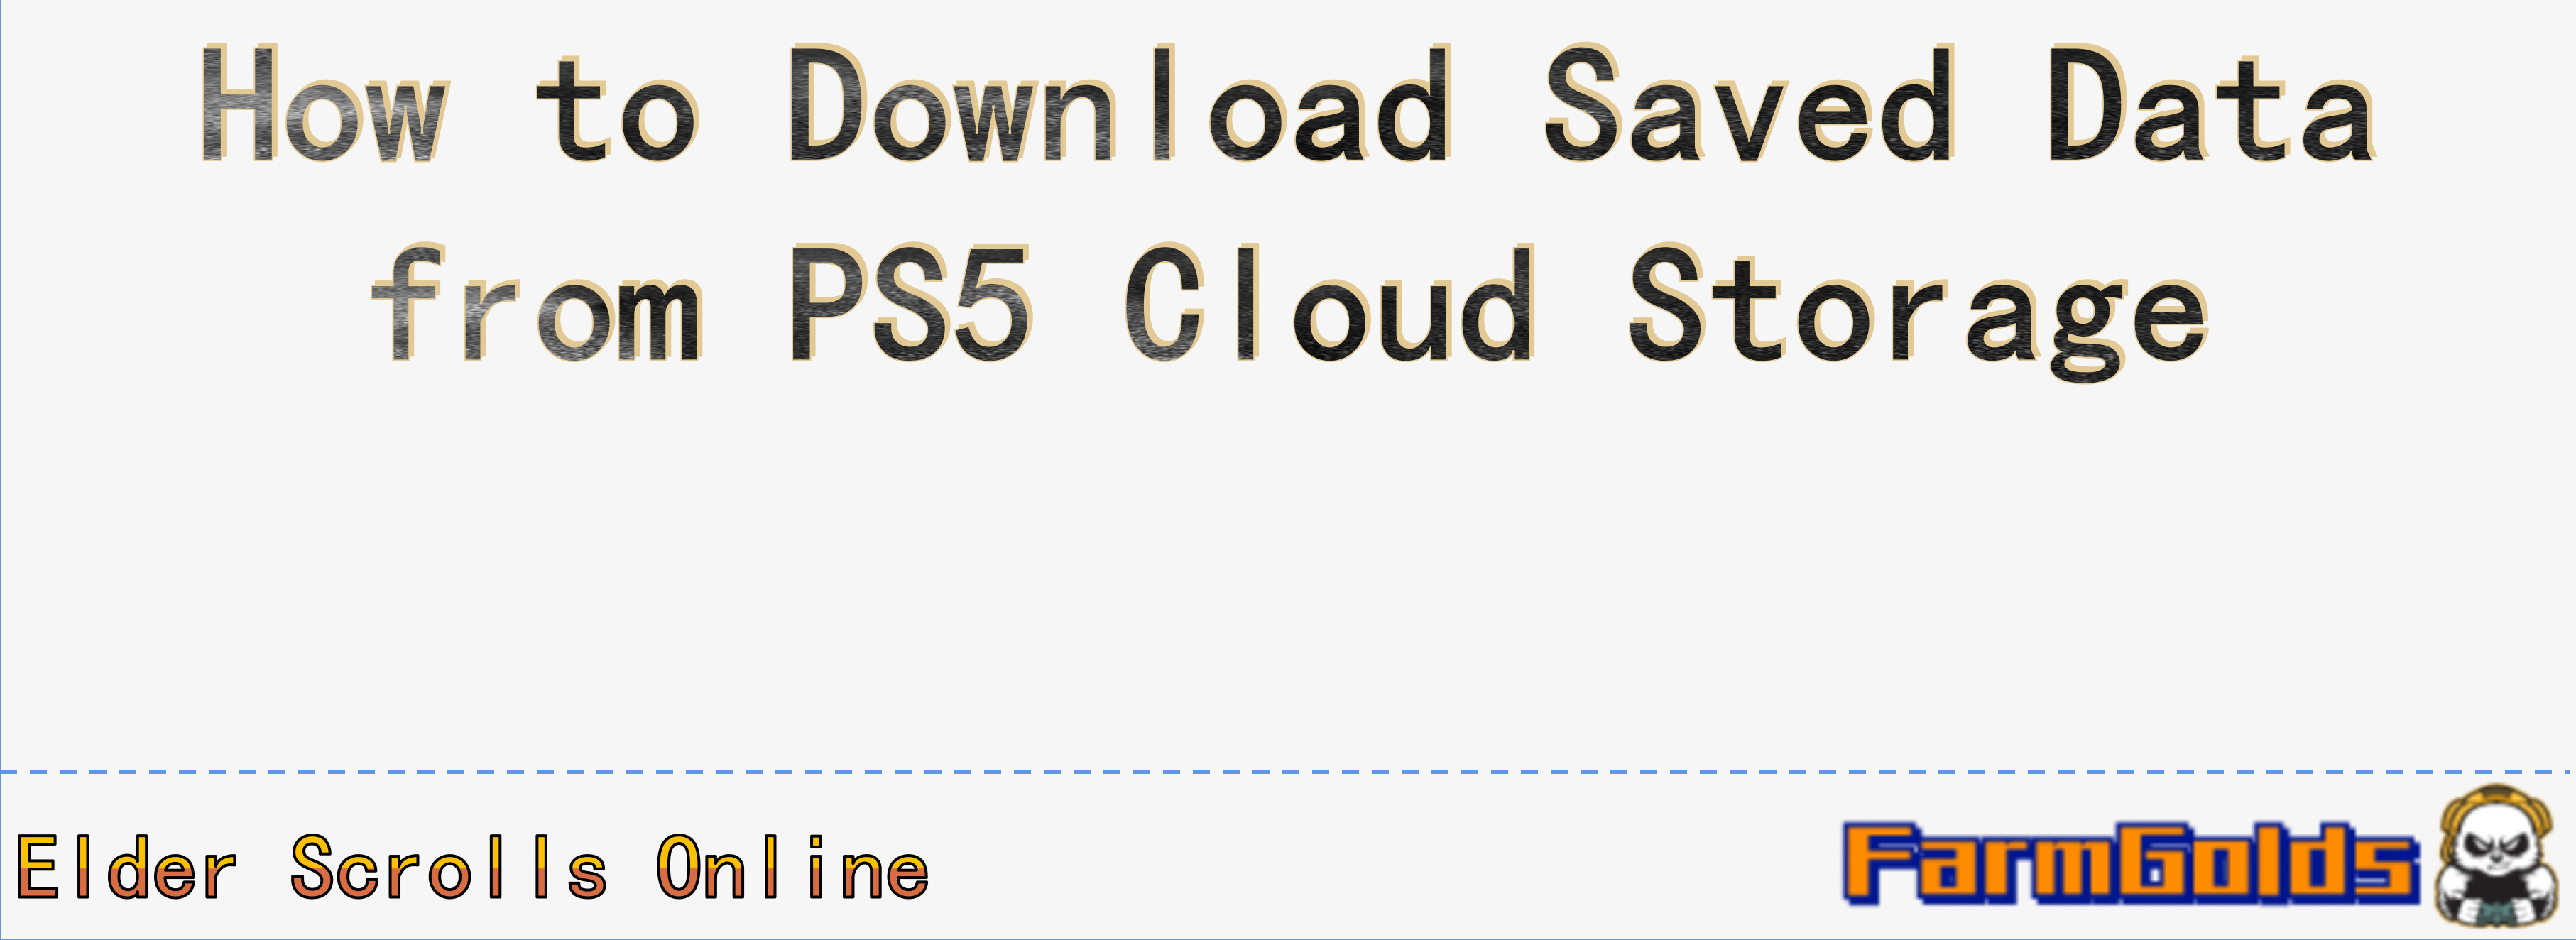 How to Download Saved Data from PS5 Cloud Storage